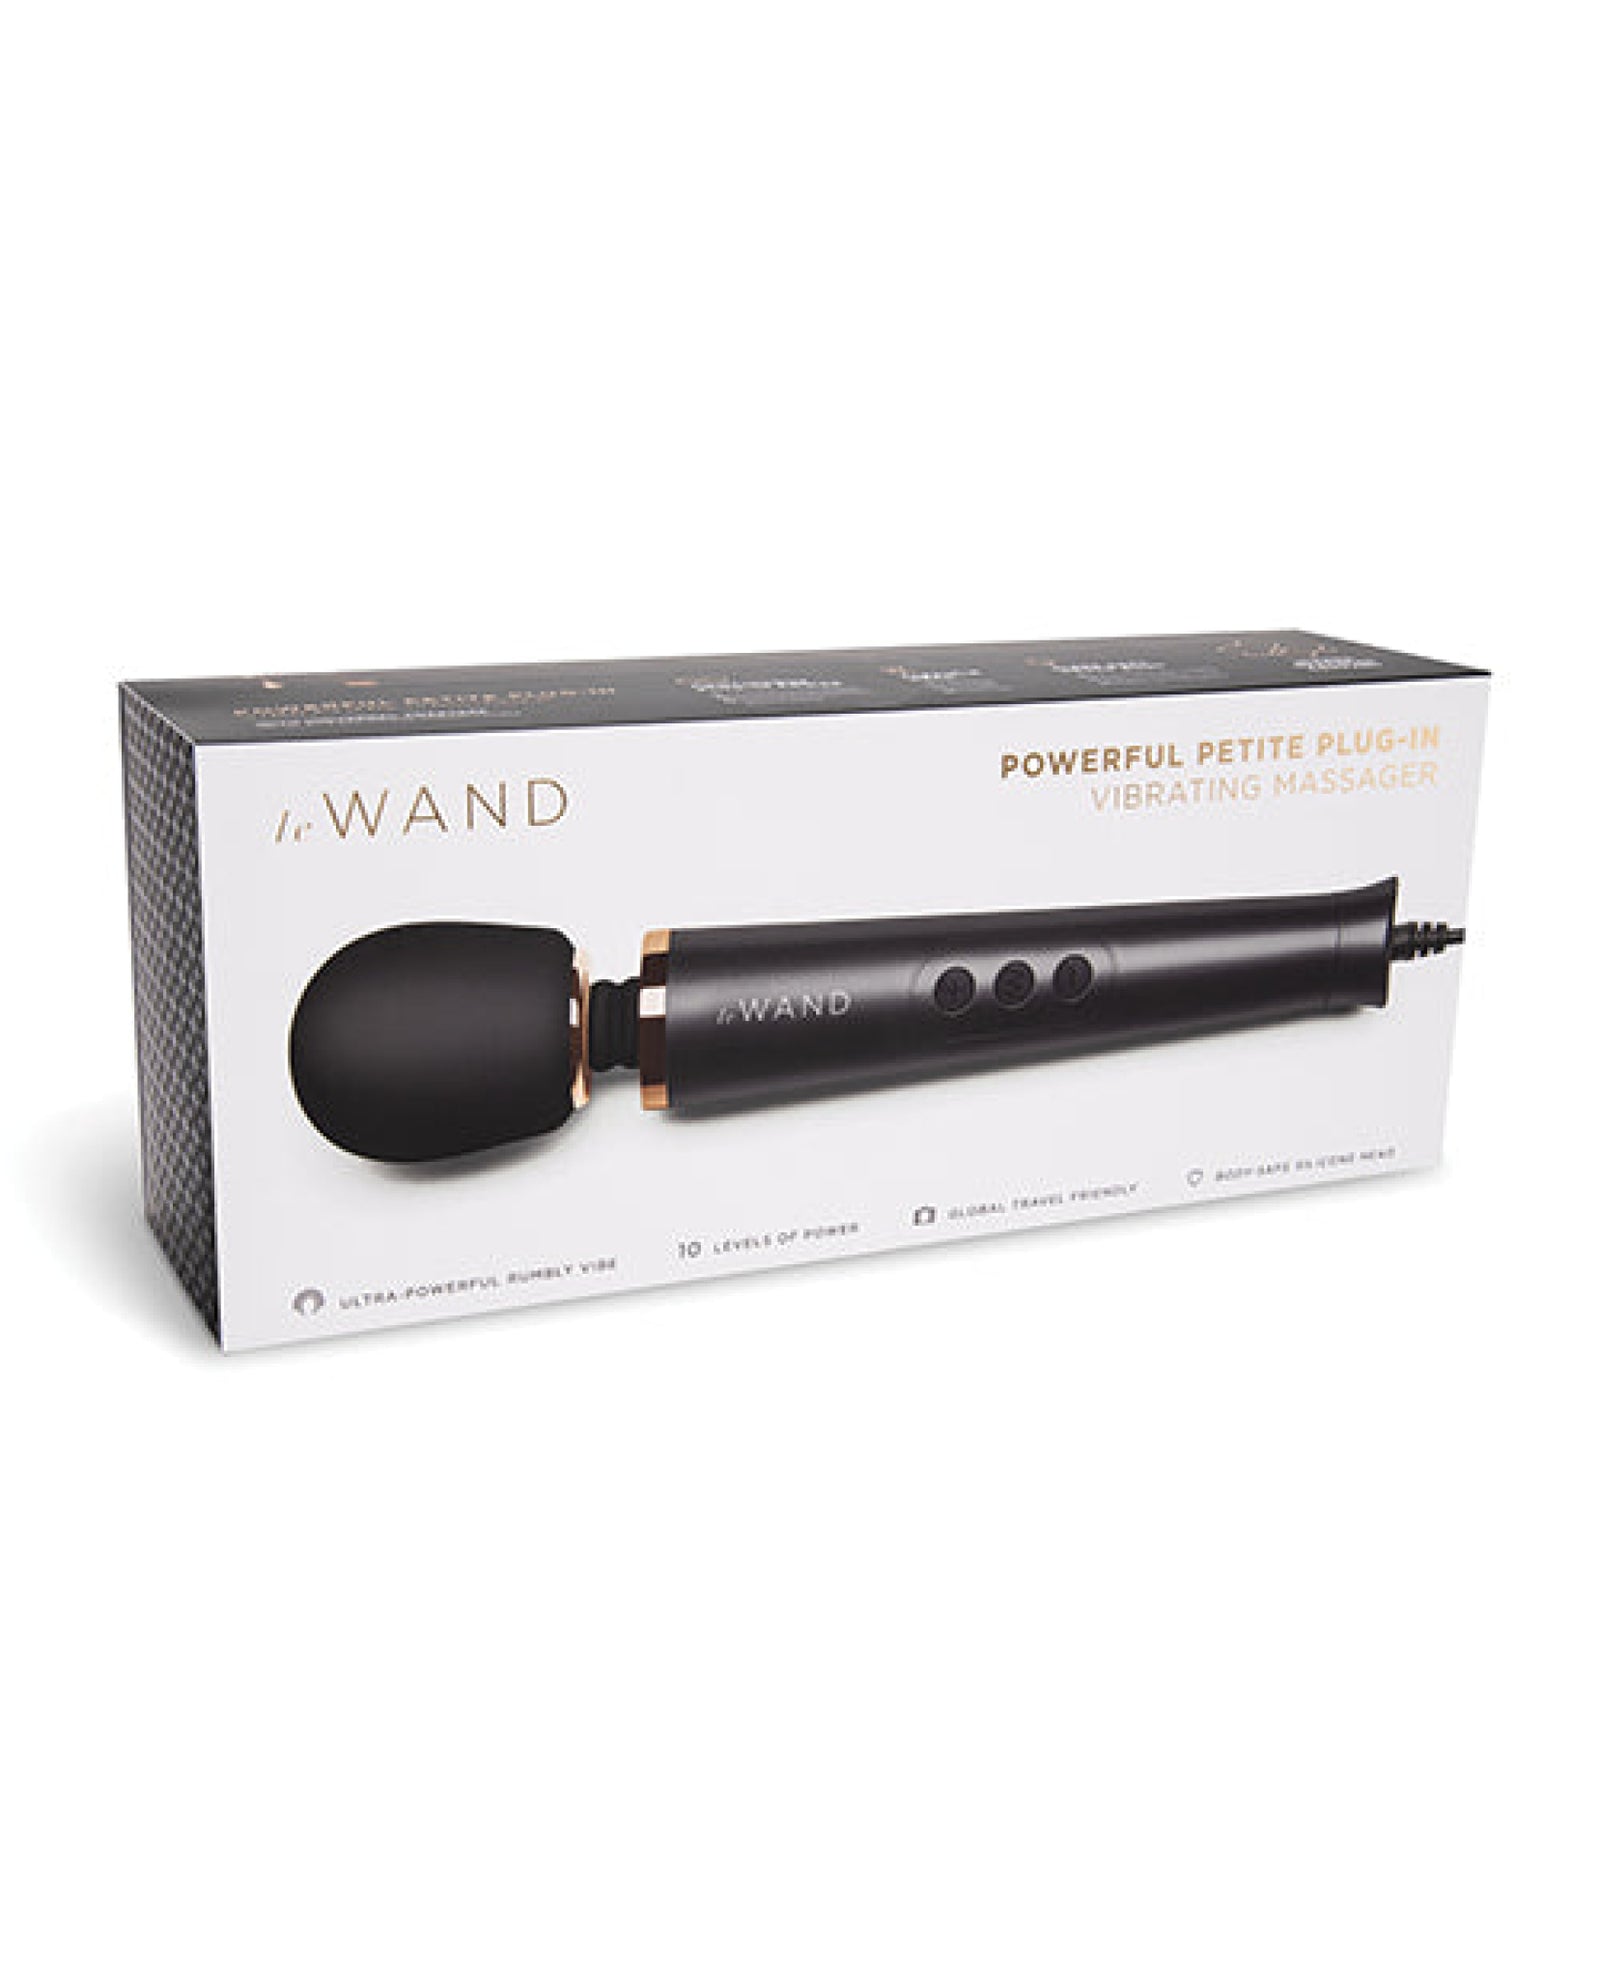 Le Wand Powerful Petite Rechargeable Vibrating Massager Le Wand